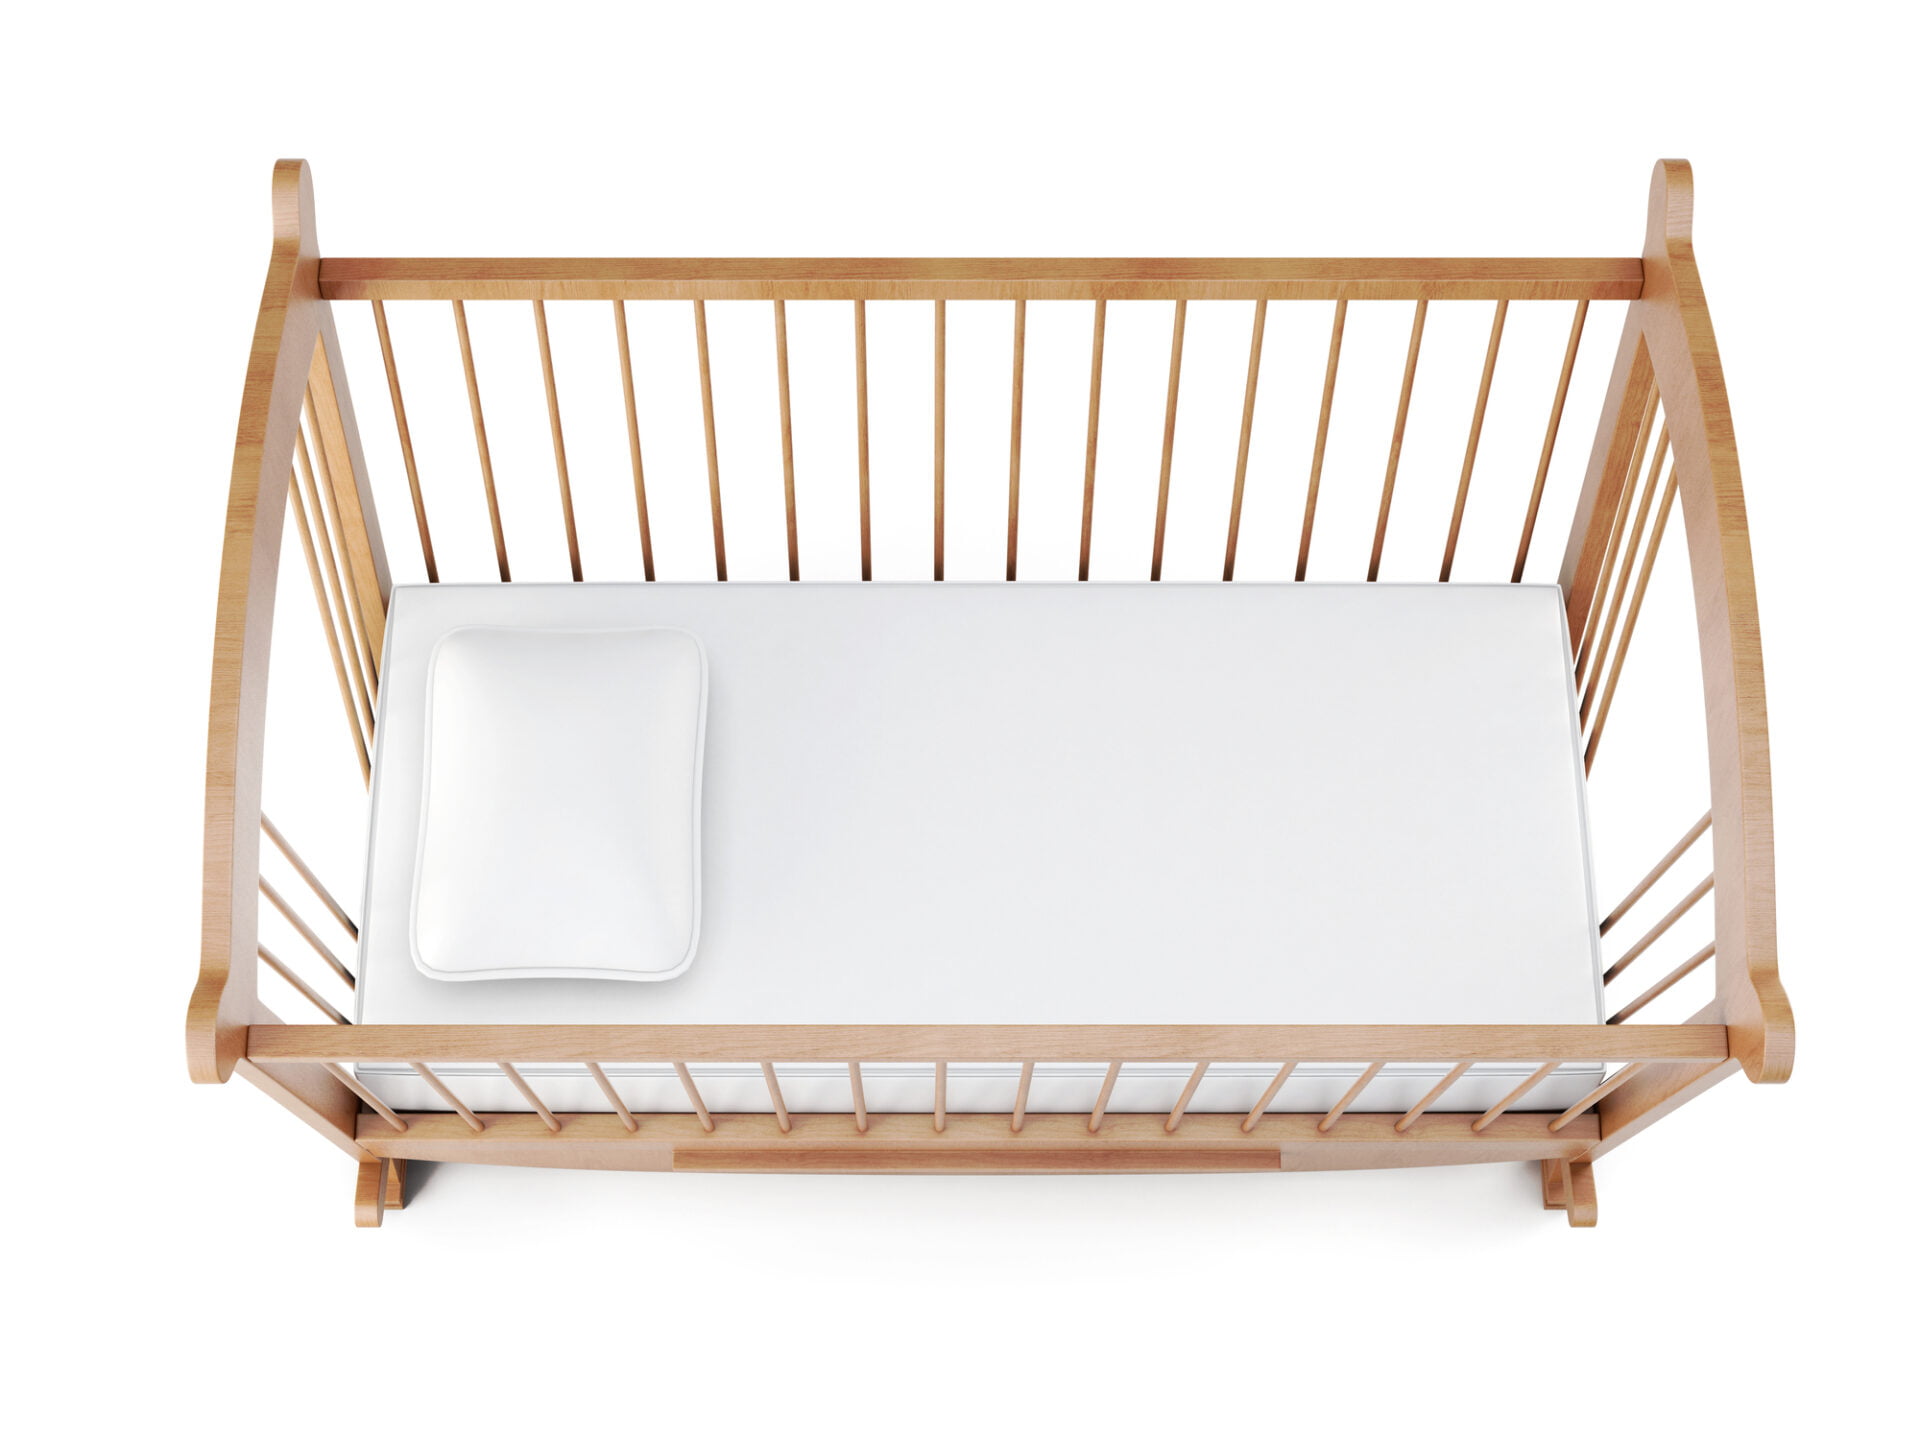 Wooden crib isolated on white background